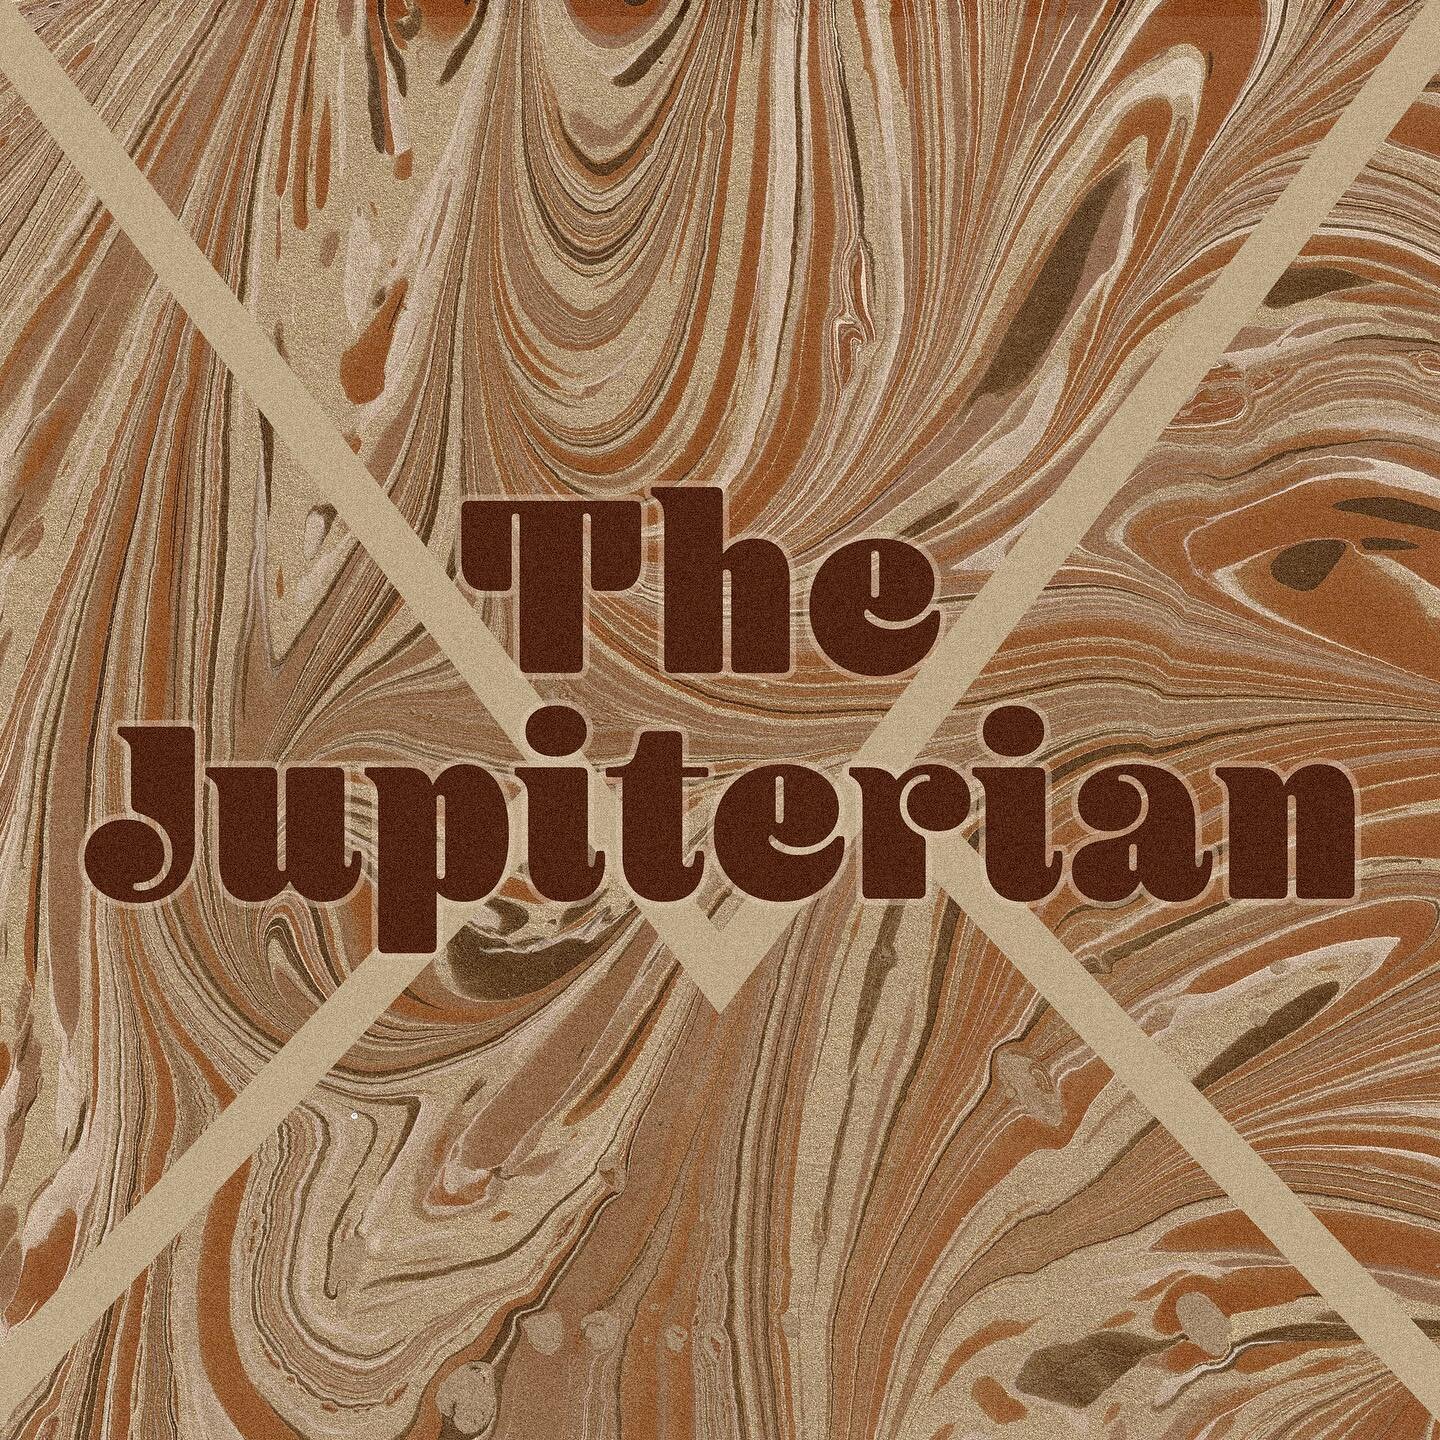 Happy 2023! It has been a powerful wrap up to 2022, and I&rsquo;m slowly getting ready for the new year and what actions I want to take.

One of my first ones will be my monthly newsletter, The Jupiterian! I&rsquo;m going to try to send it within the